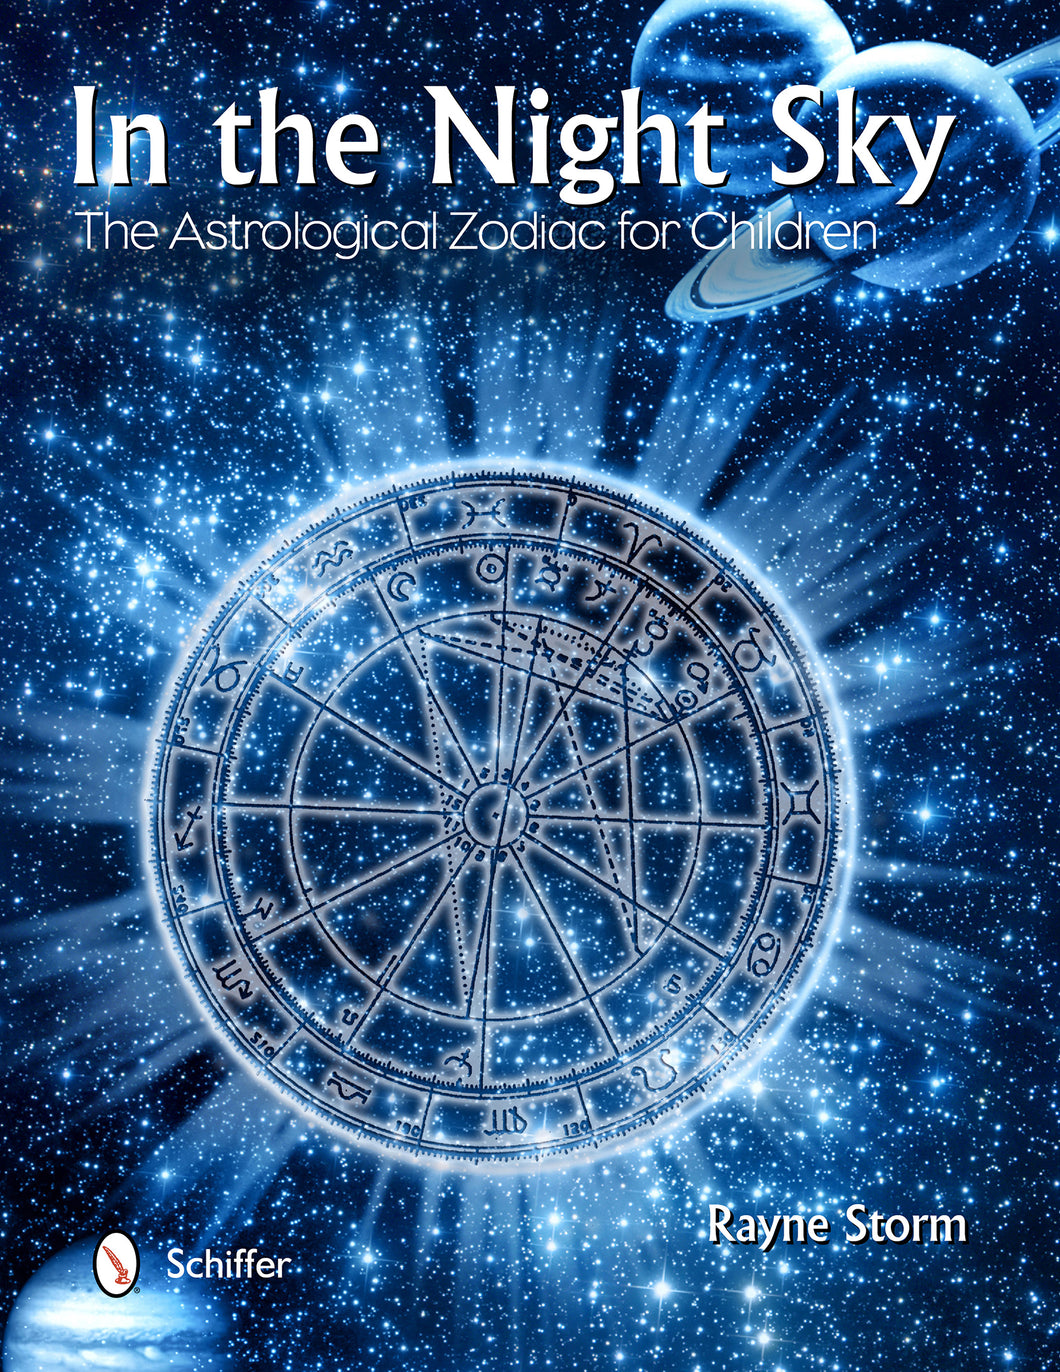 In the Night Sky: The Astrological Zodiac for Children